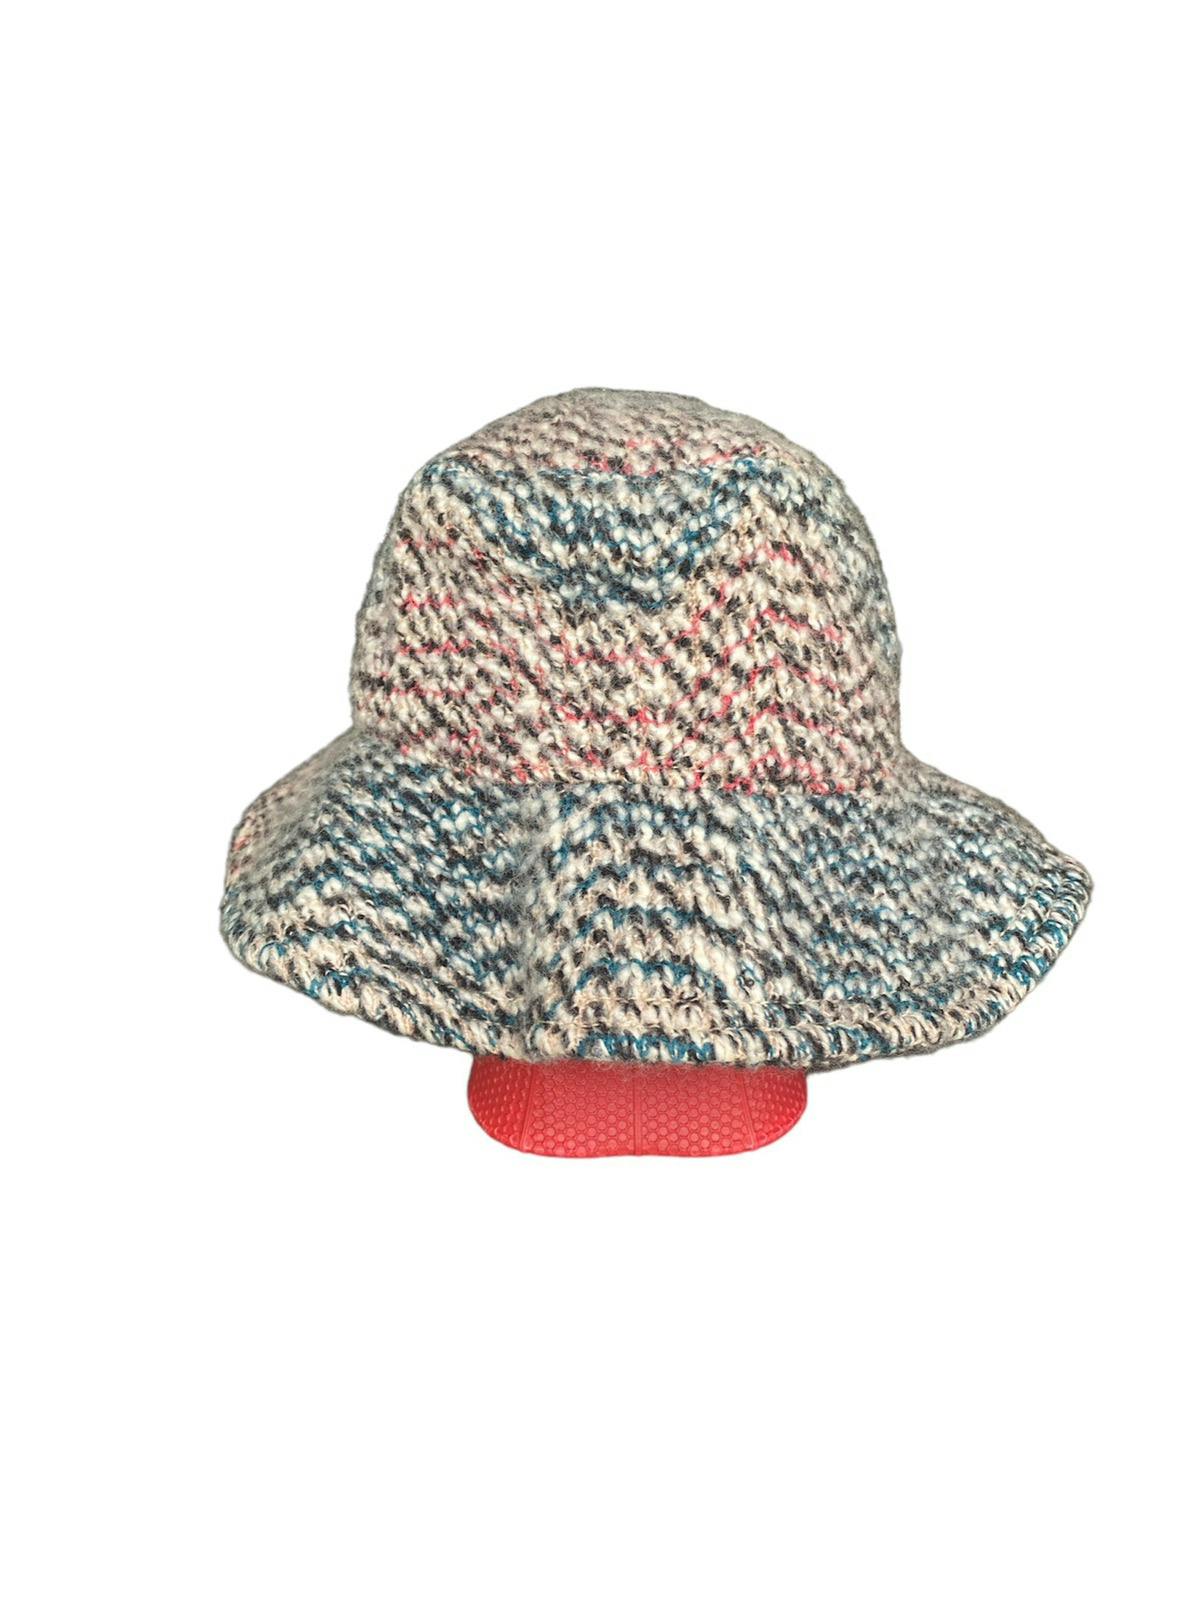 Vintage Missoni Hat Made in Italy - 4